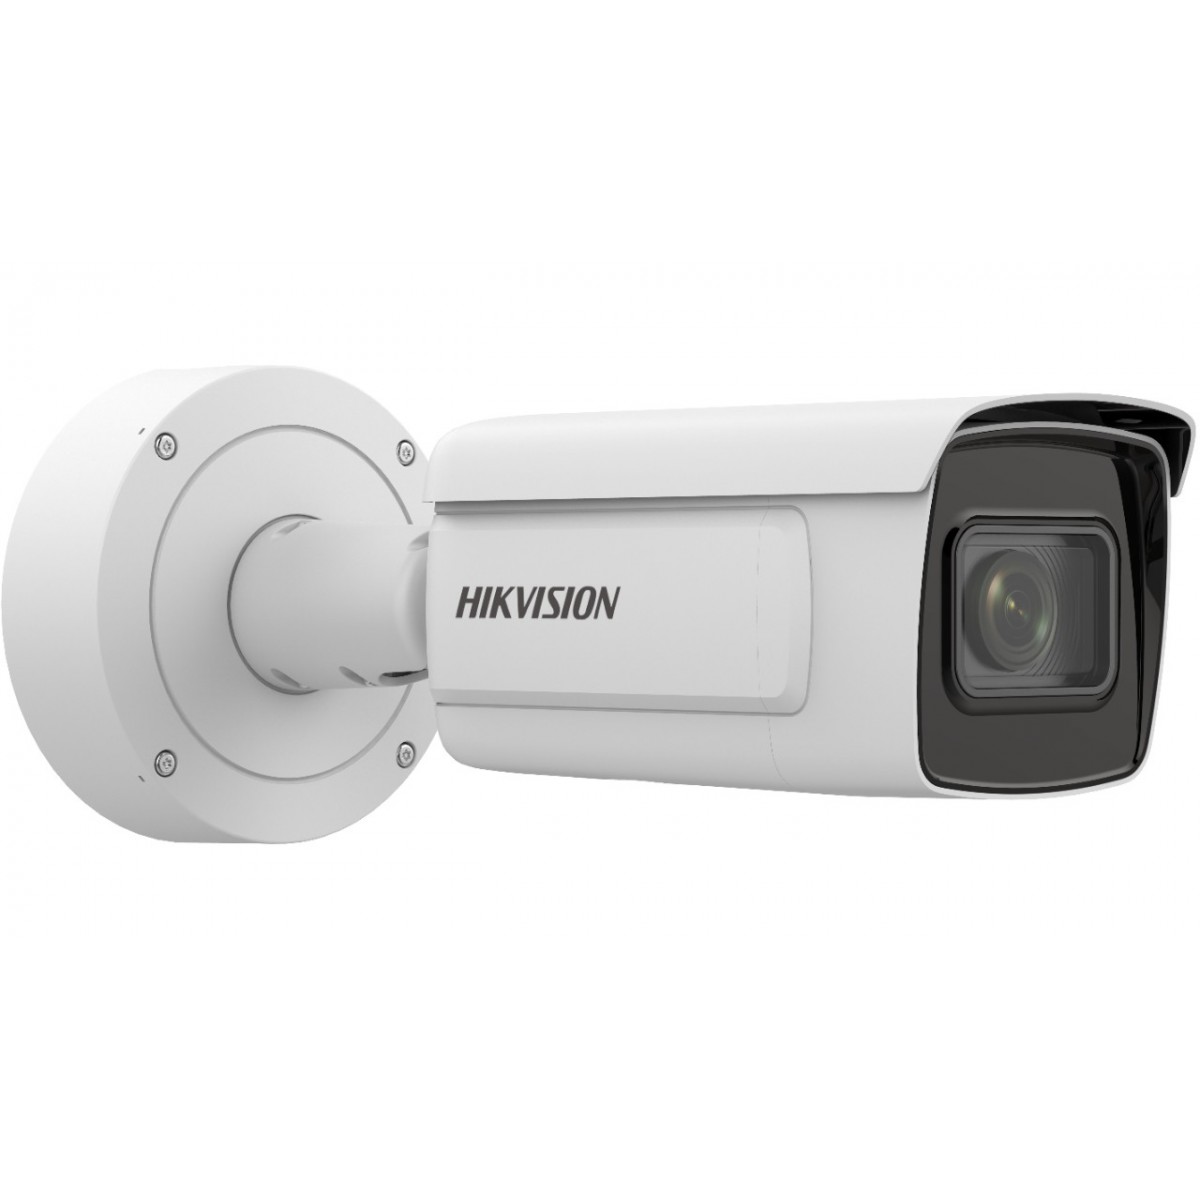 Hikvision IDS-2CD7A26G0/P-IZHSY(8-32MM)( C)